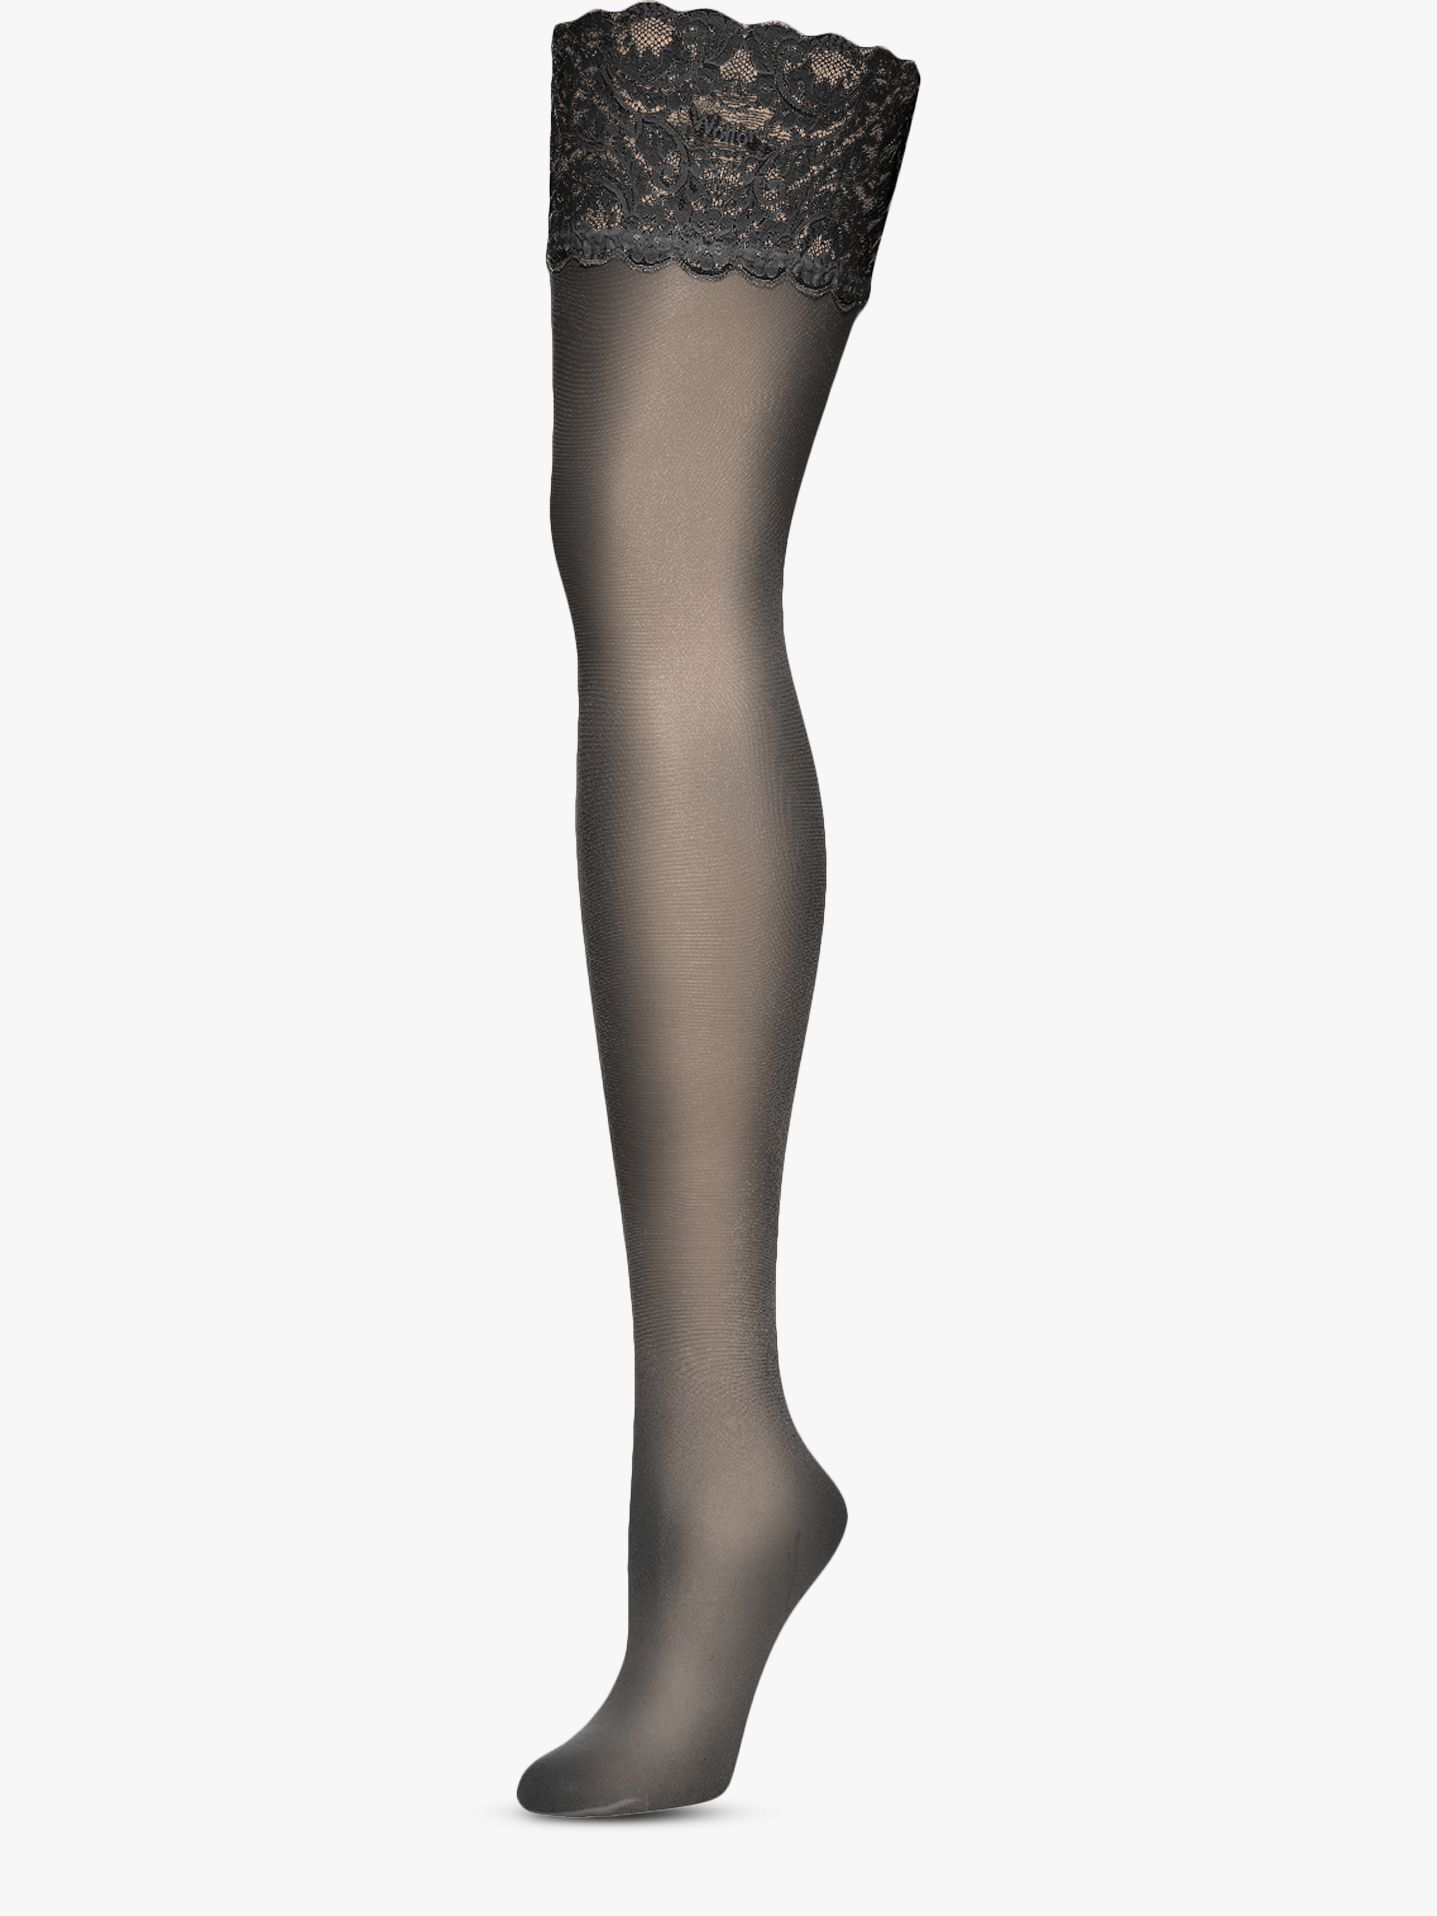 Wolford Satin Touch 20 Denier Stay Ups, Black, S